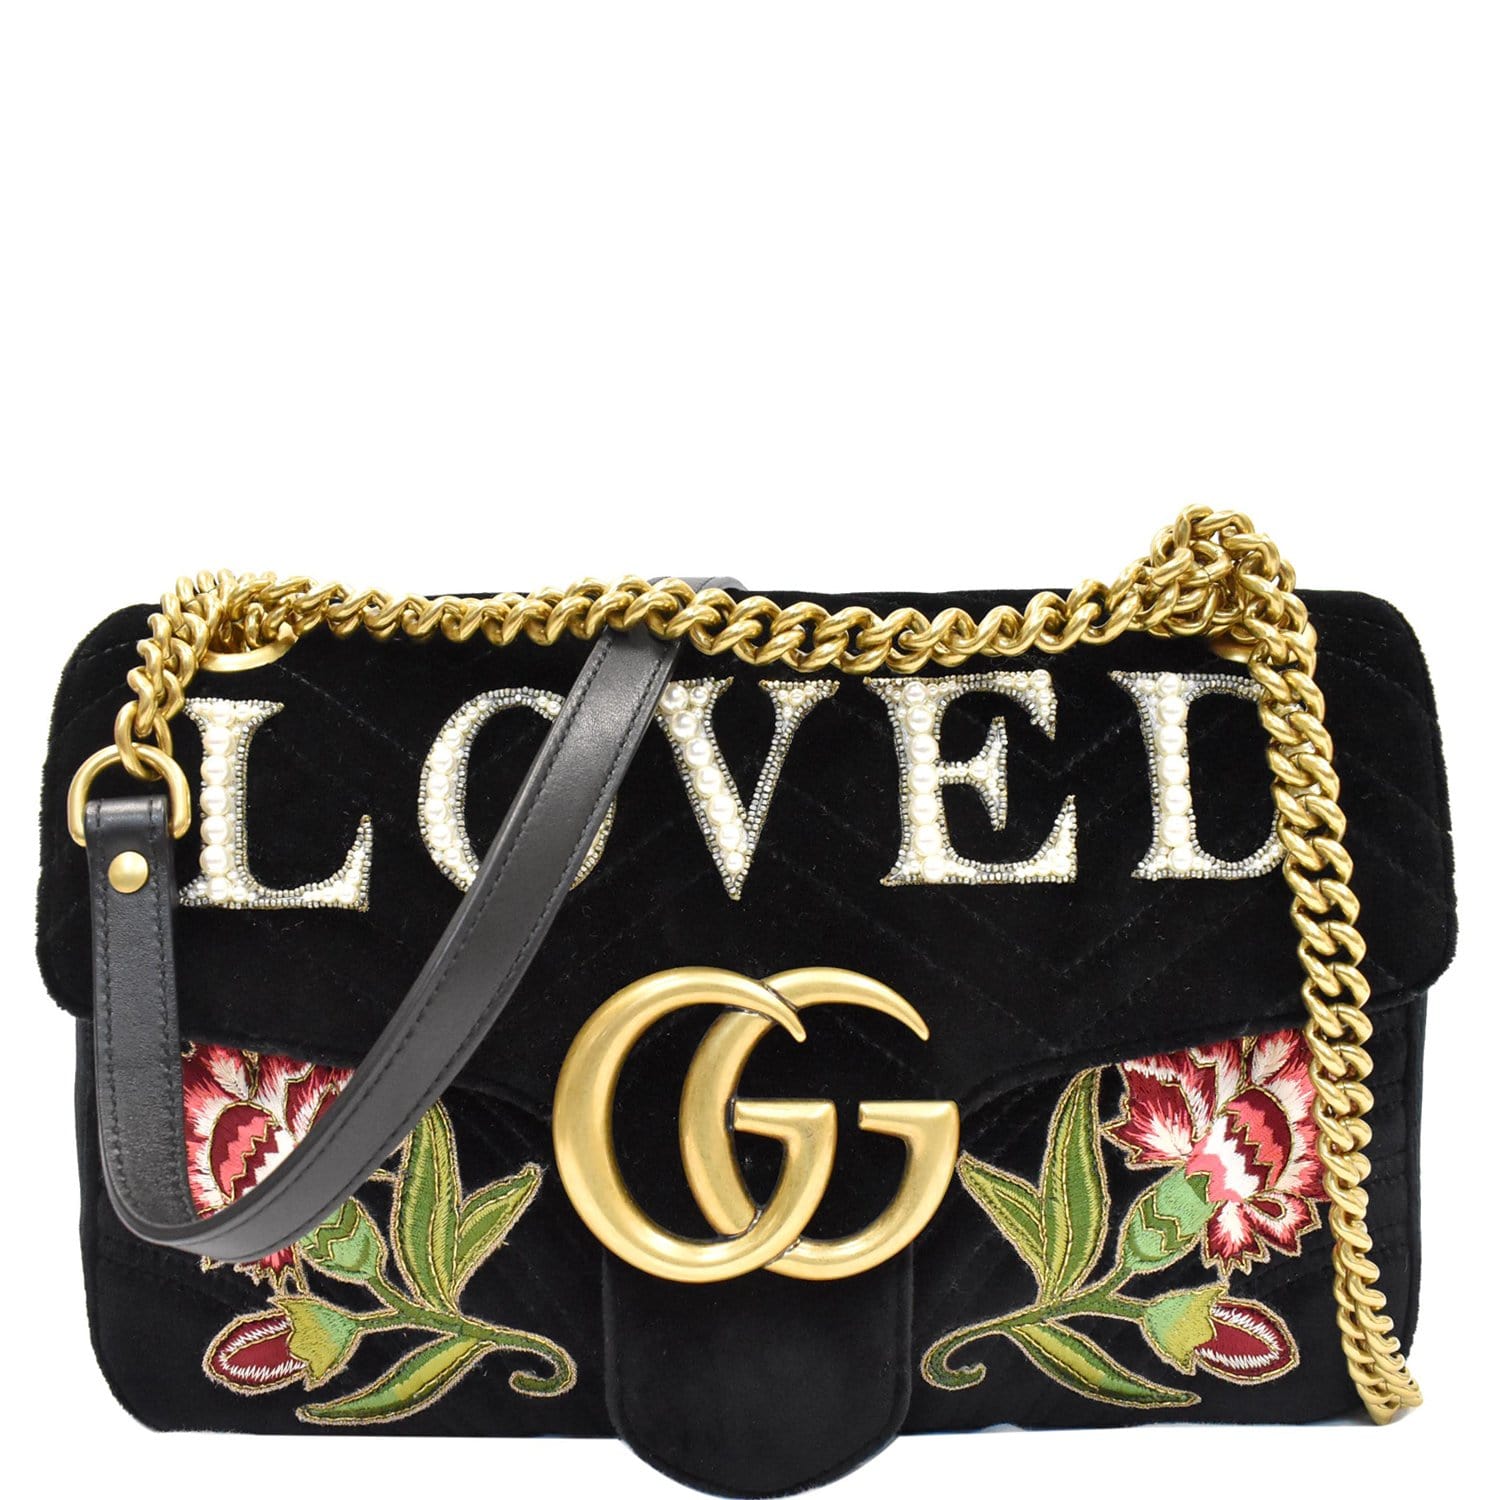 Do you love your Gucci bag? So why not let us help you with